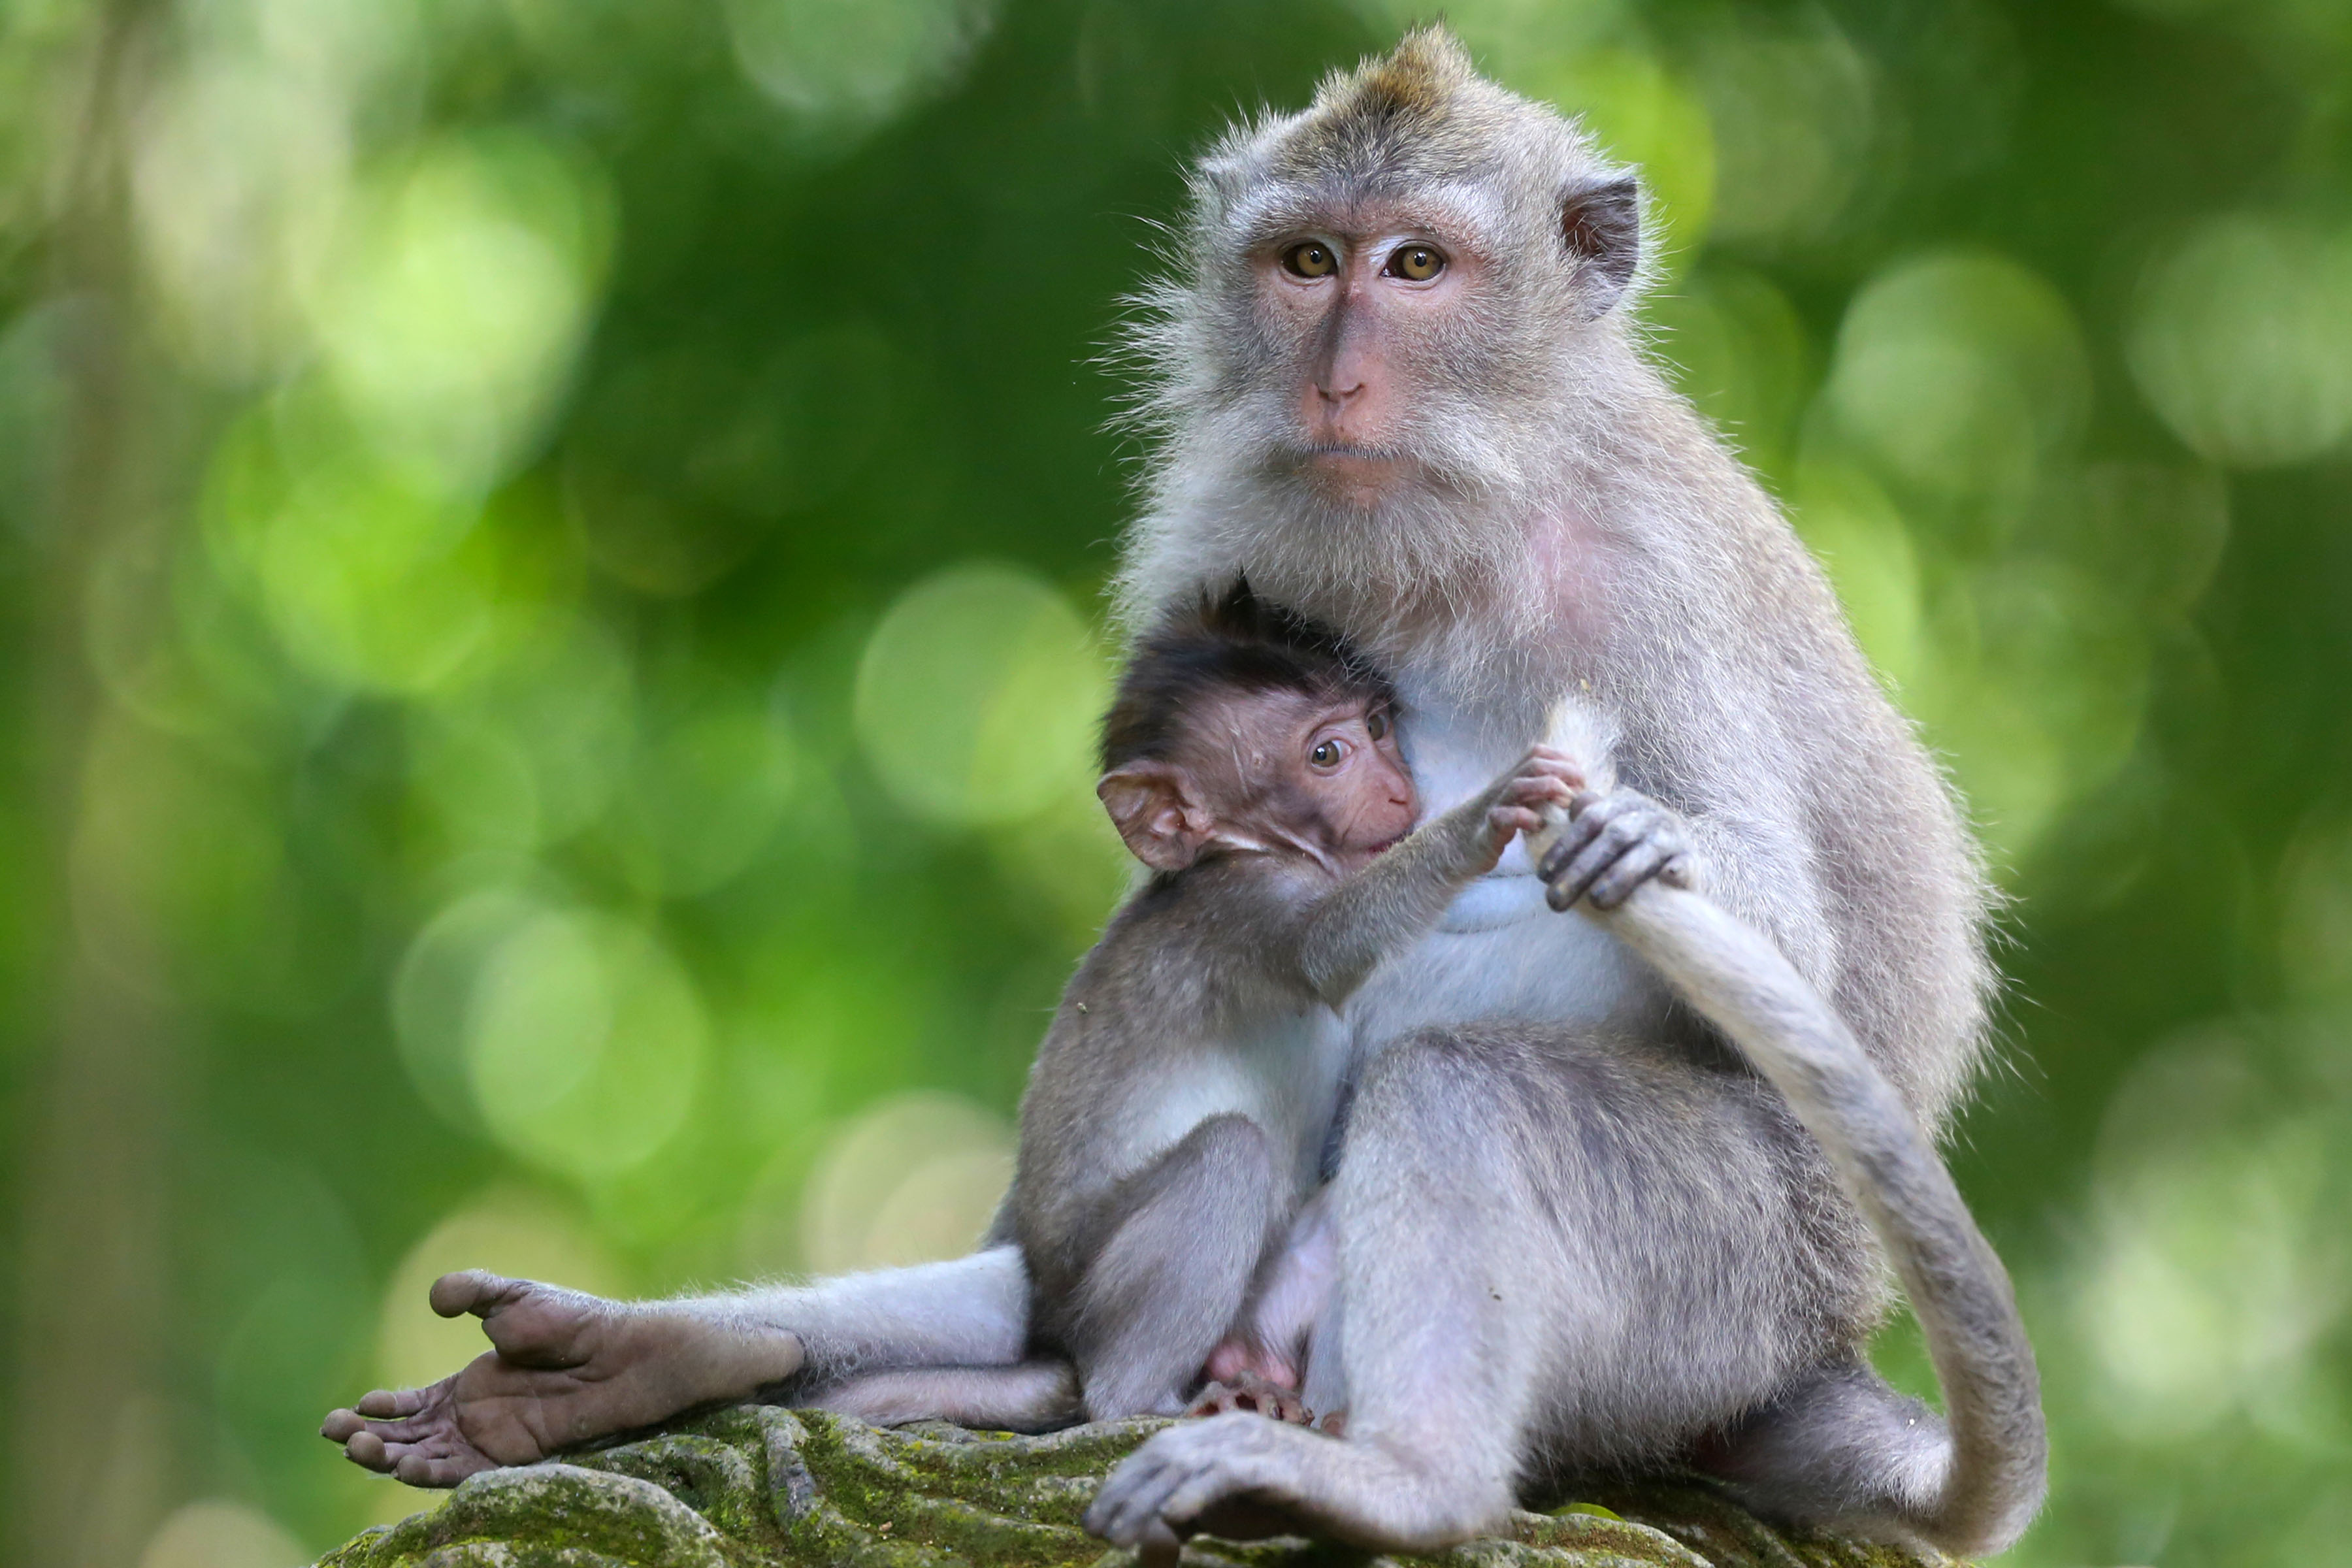 8. Play with wild Macaque Monkeys Monkey Forest Bali, Indonesia